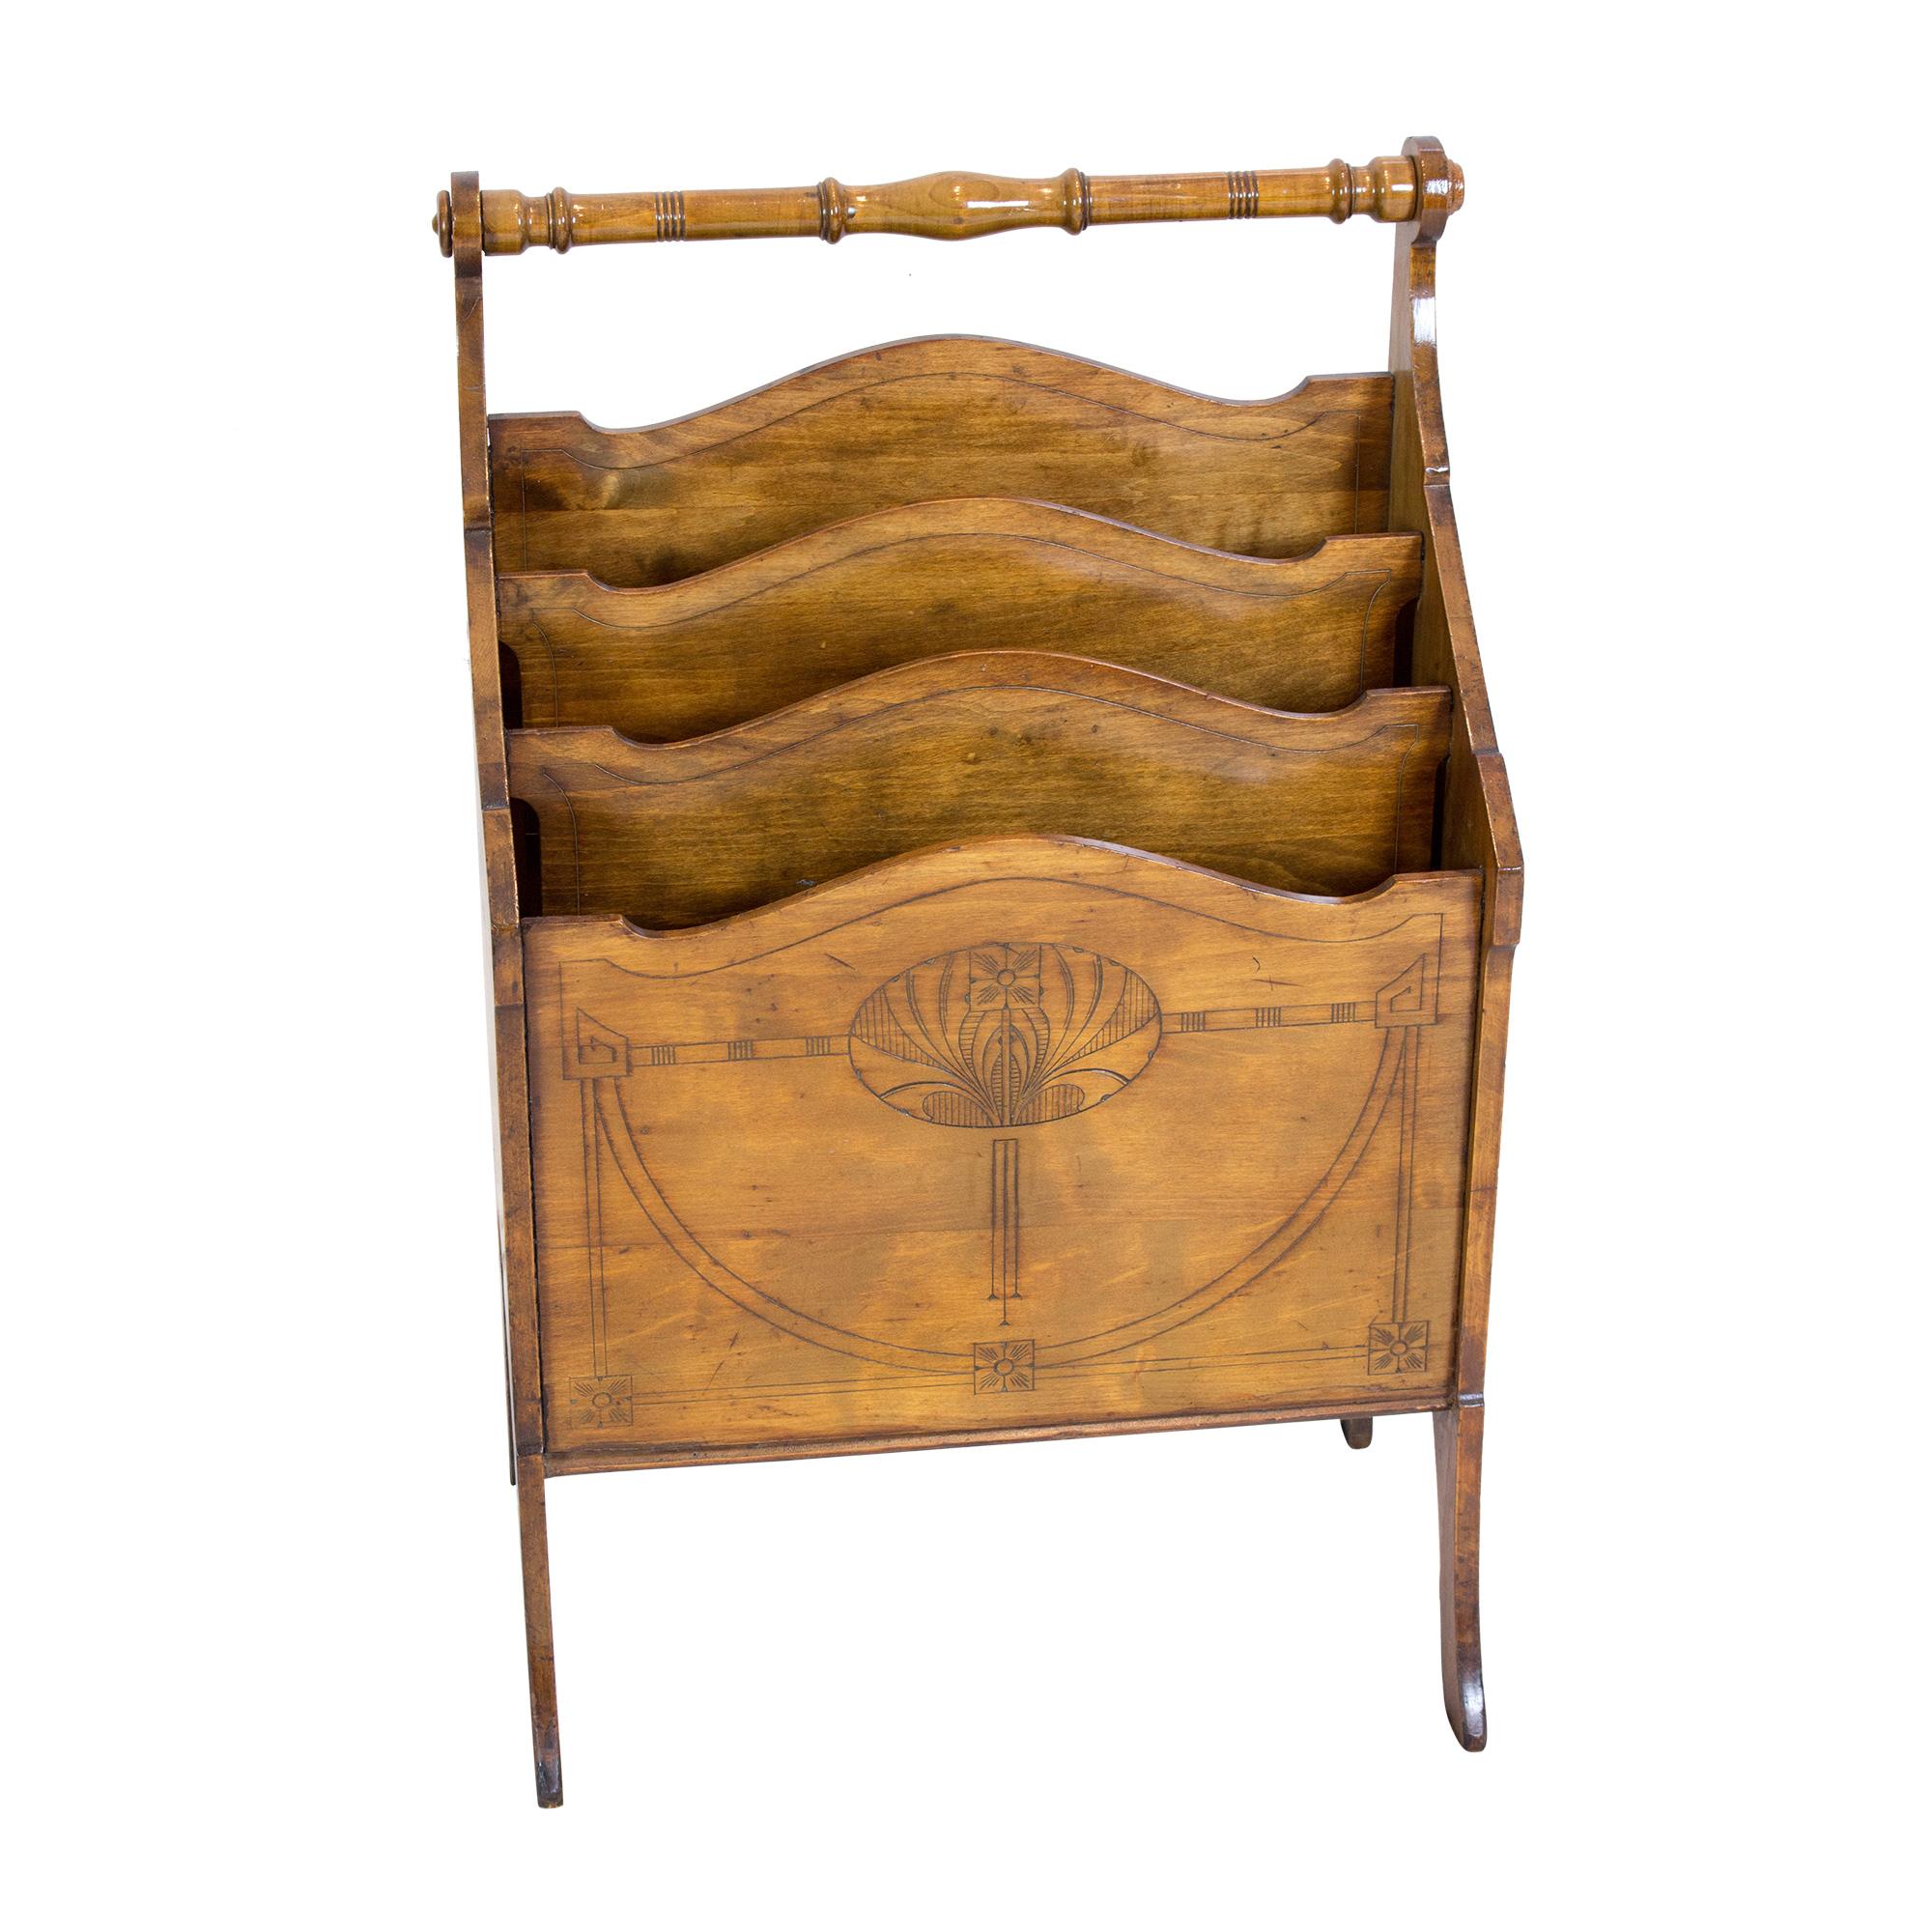 Solid wood walnut stained in beech wood. Extremely rare magazine rack or newspaper rack with three compartments. Turned handle and very beautiful Art Nouveau ornamentation on the front and sides.
Art Nouveau around 1900.